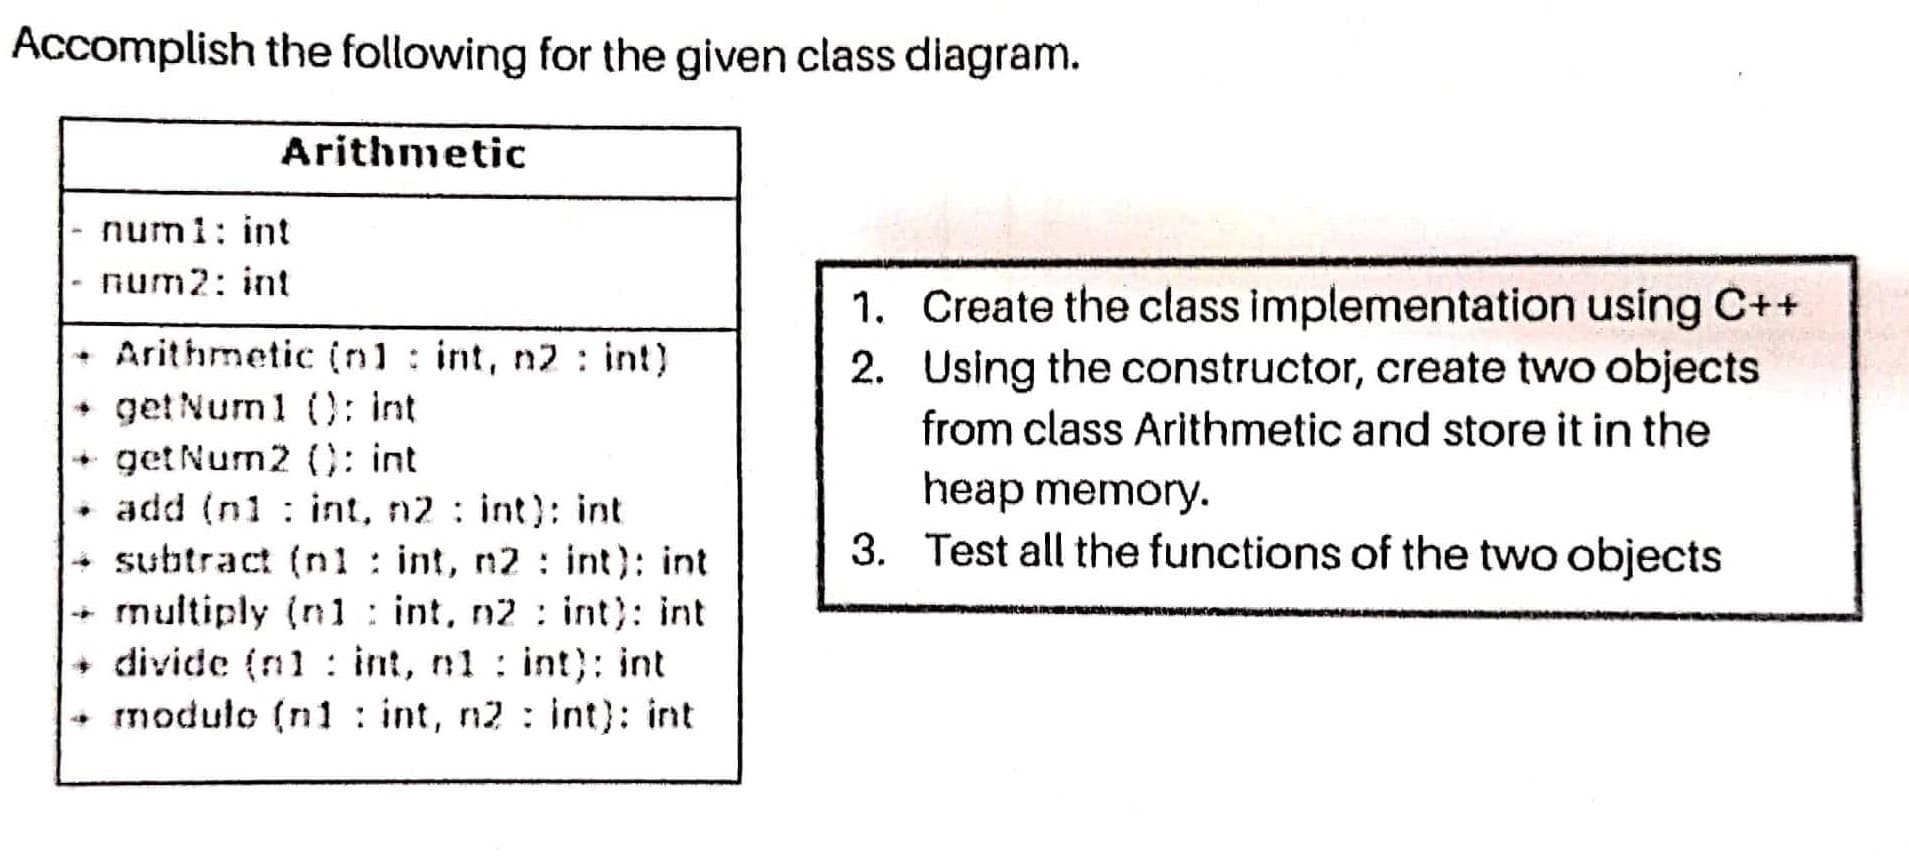 Accomplish the following for the given class diagram.
Arithmetic
- num1: int
num2: int
1. Create the class implementation using C++
2. Using the constructor, create two objects
Arithmetic (nl: int, n2 : int)
get Num1 (): int
+ get Num2 (C: int
• add (n1 : int, n2 : int): int
+ subtract (nl : int, n2 : int): int
multiply (n1 : int, n2: int): int
+ divide (n1 : int, n1 : int): int
+ modulo (n1 : int, n2 : int): int
from class Arithmetic and store it in the
heap memory.
3. Test all the functions of the two objects
